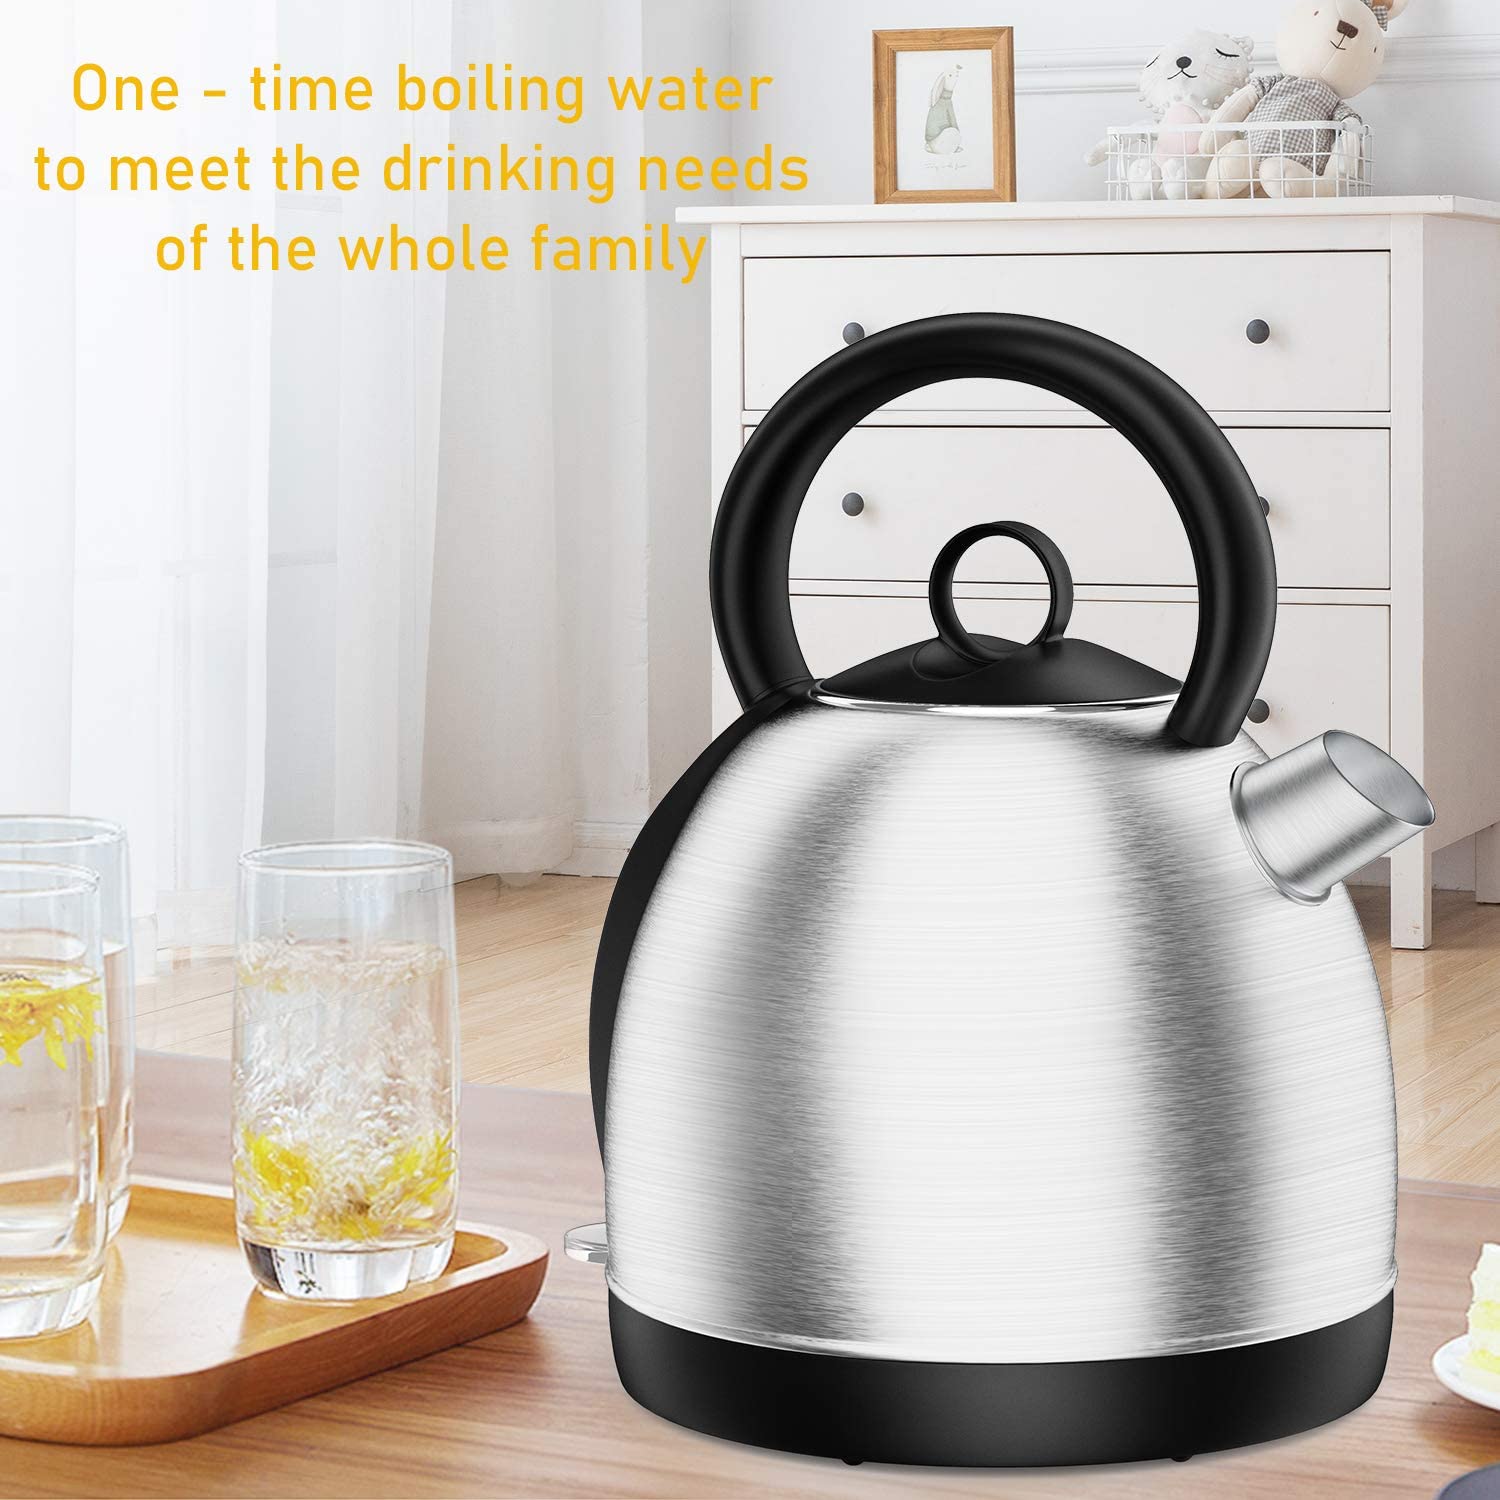 Kettle Water Electric Fast Tea Stainless Steel Heating Pot Boiling